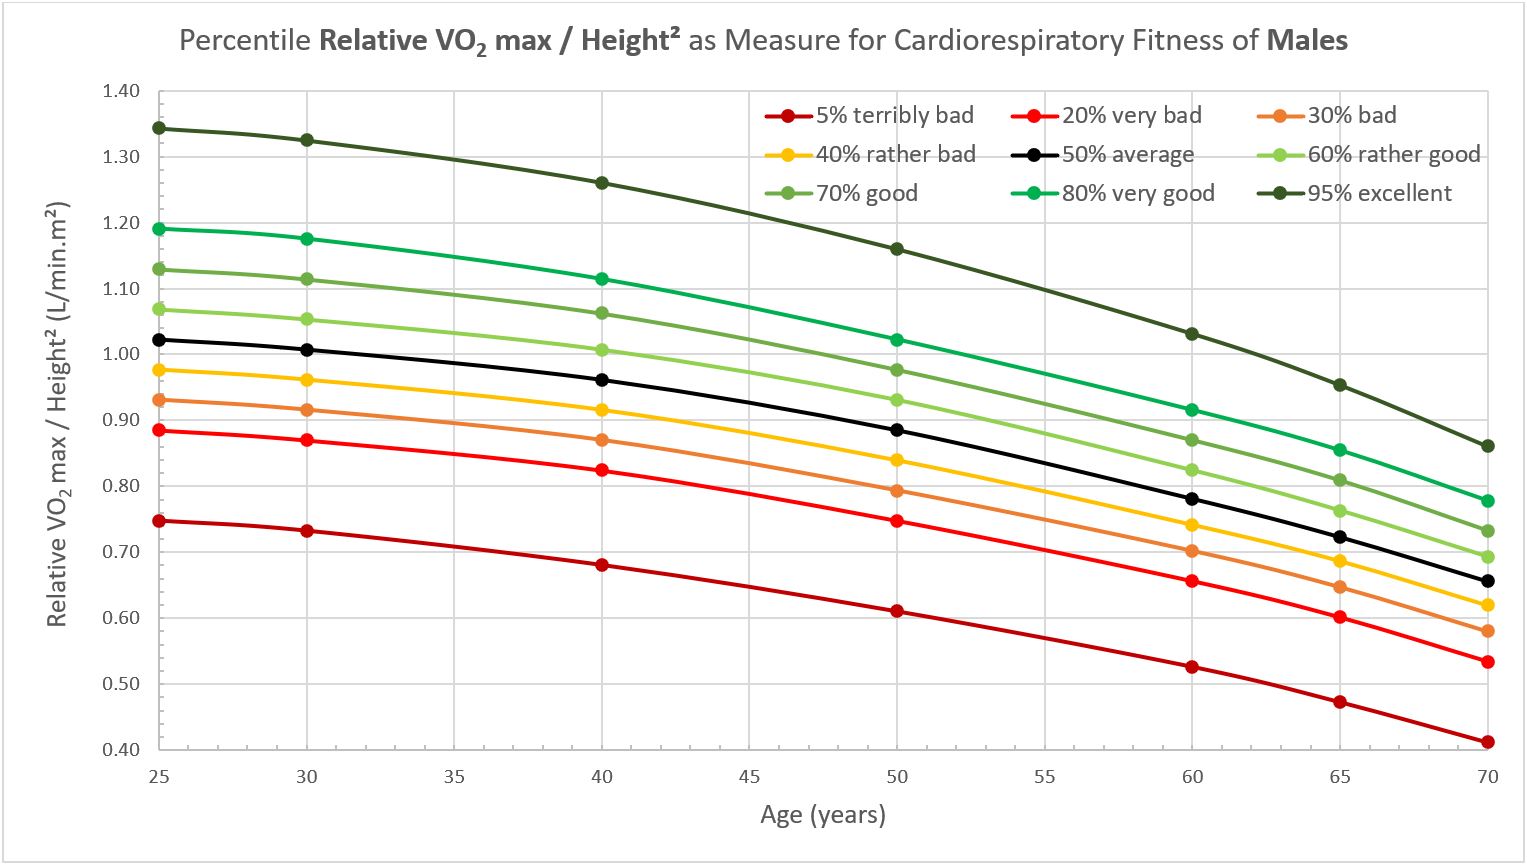 Relative VO2 max over height2 reference chart for males